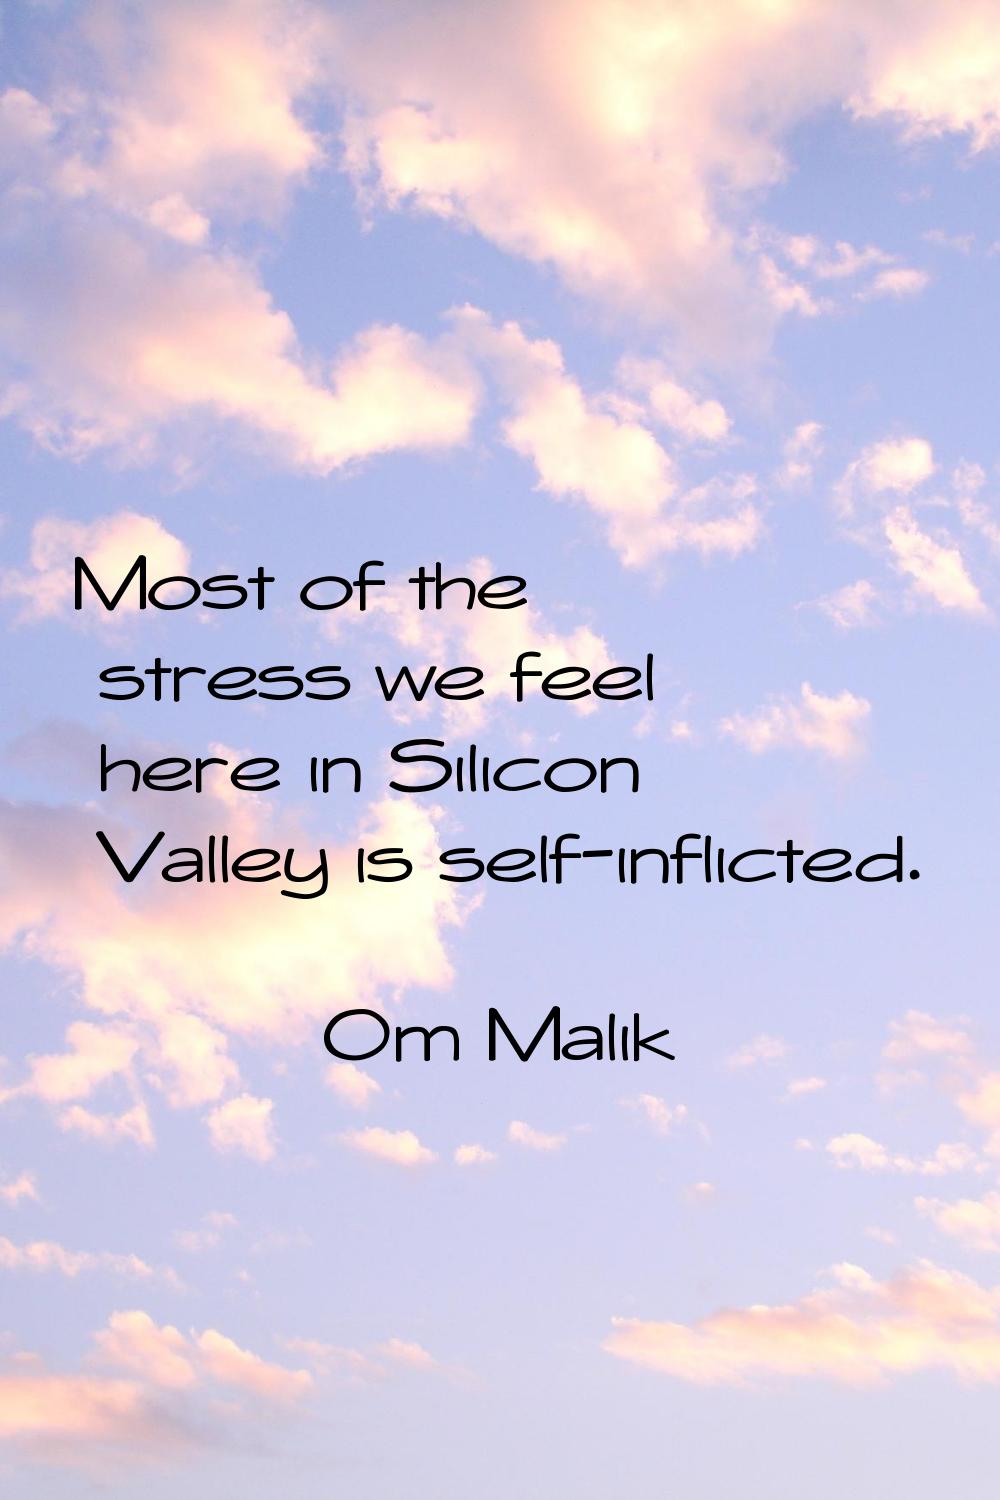 Most of the stress we feel here in Silicon Valley is self-inflicted.